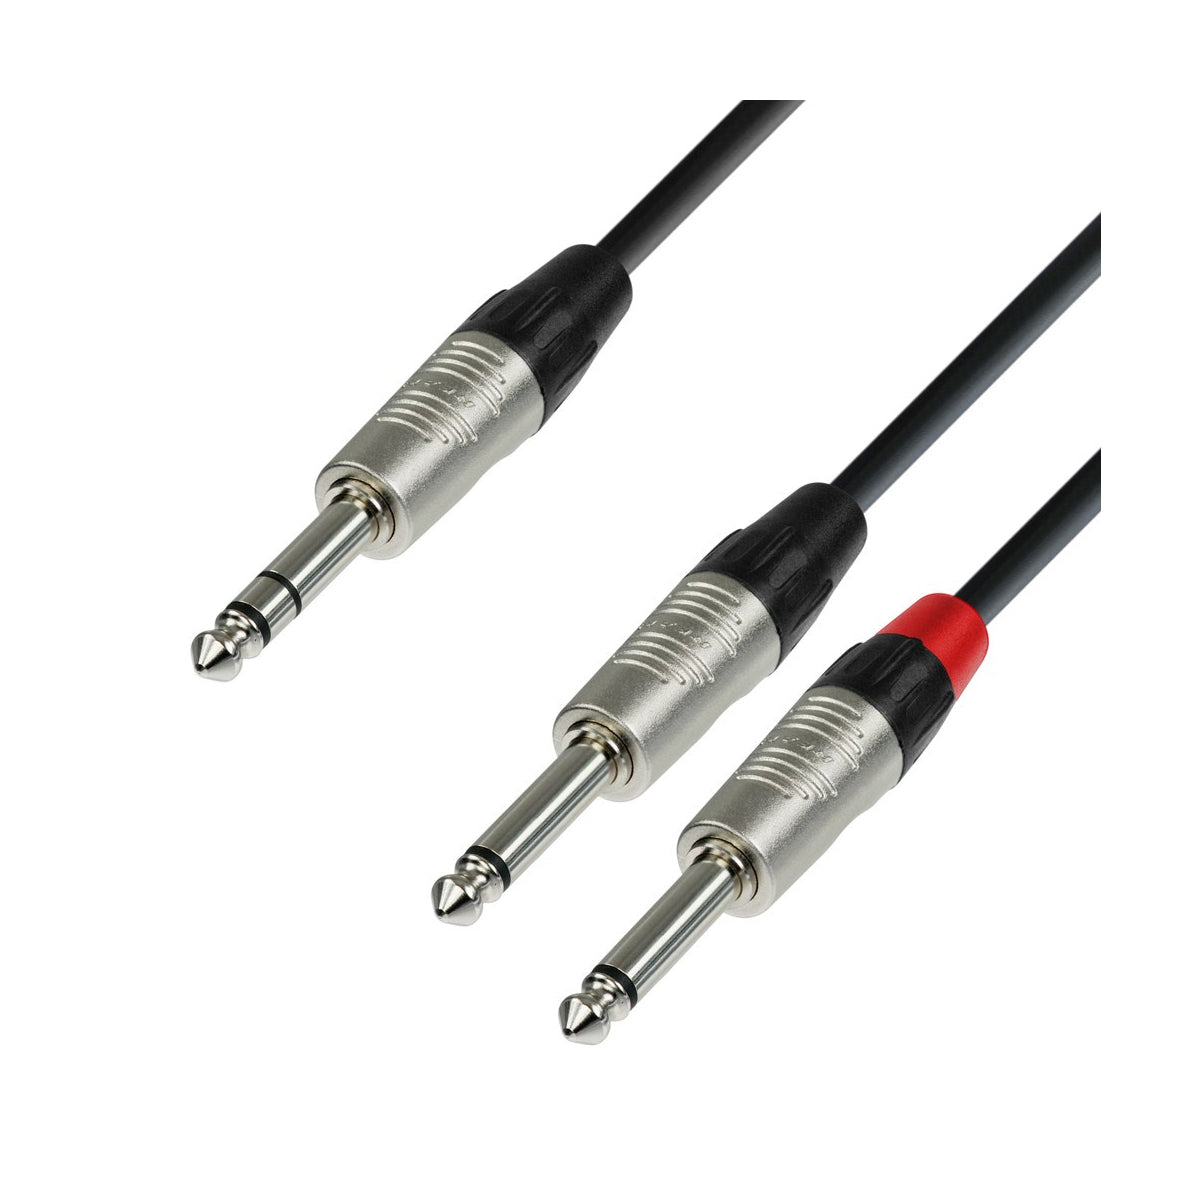 Adam Hall Cables K4 YVPP 0150 - Audio Cable REAN 6.3mm Jack stereo to 2 x 6.3mm Jack mono 1.5m